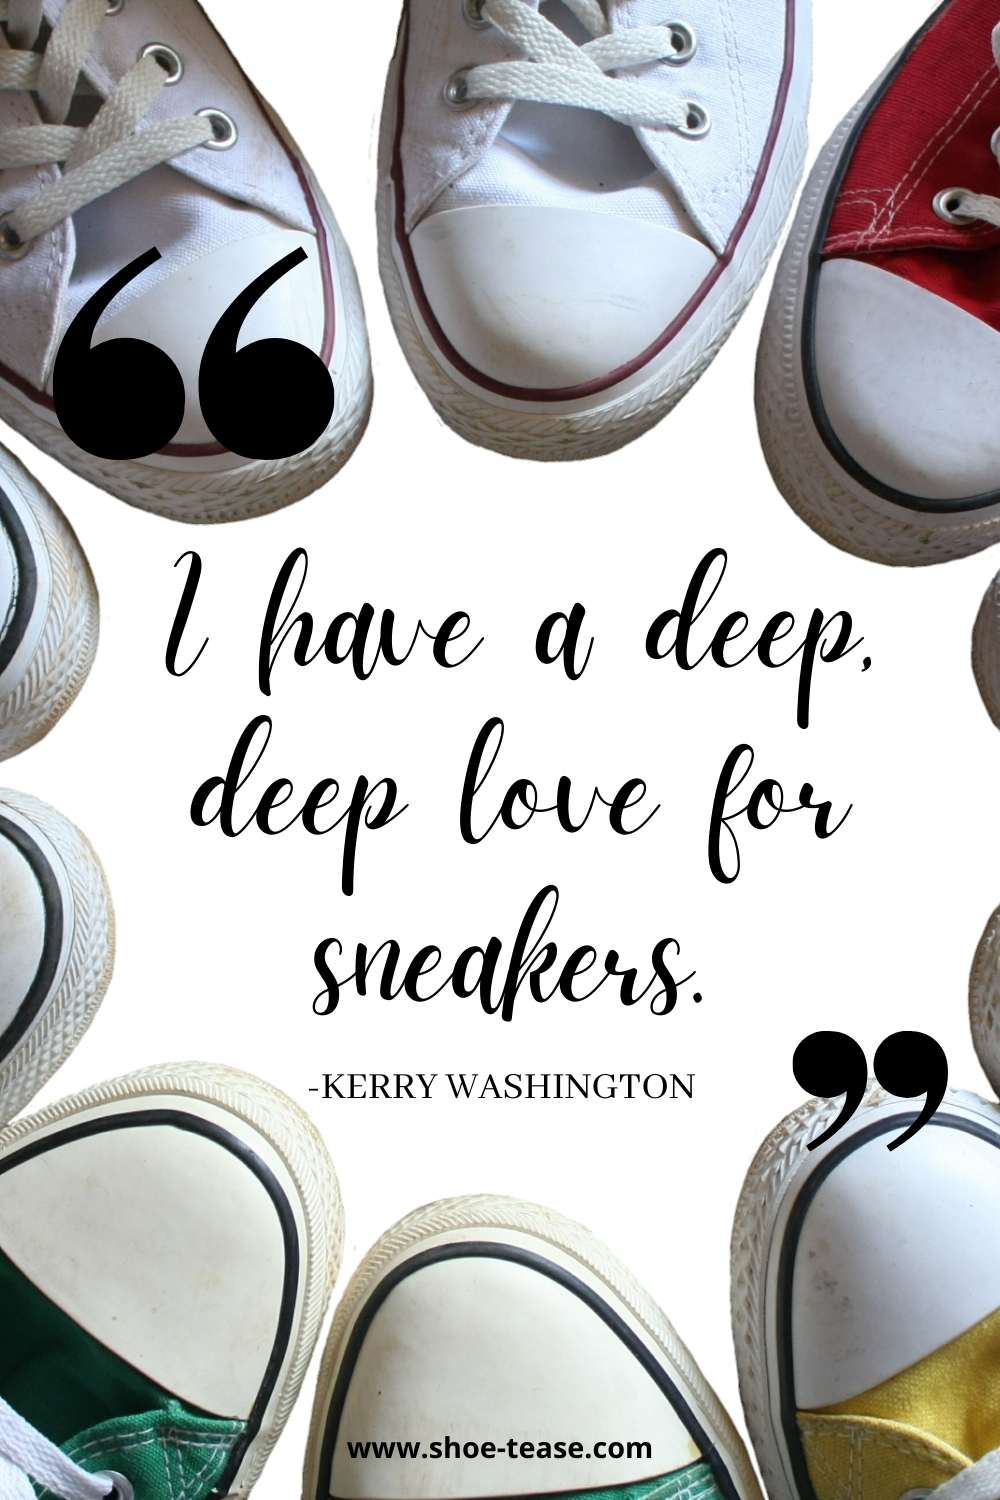 Sneakers Quote by Kerry jelly reading I hae a deep, deep love for sneakers over image of toes of shoes.